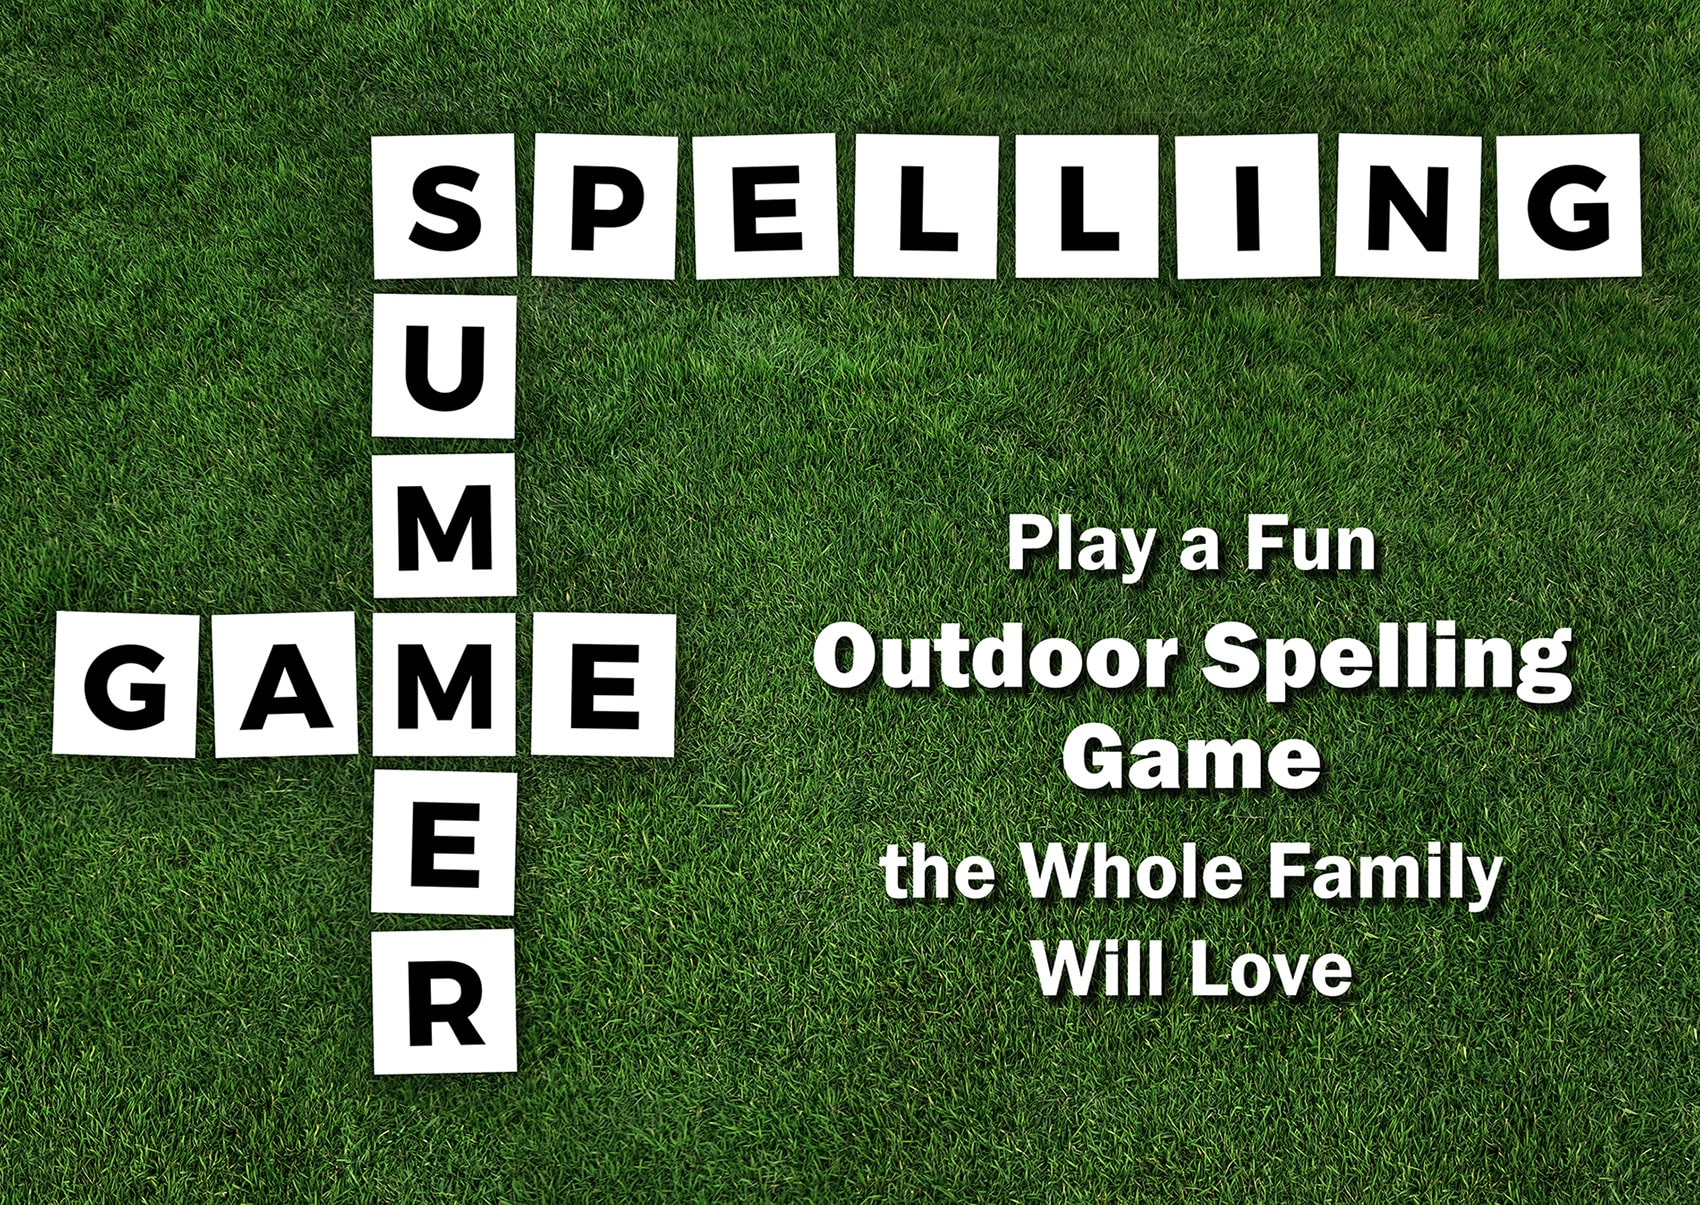 Play an Outdoor Spelling Game 